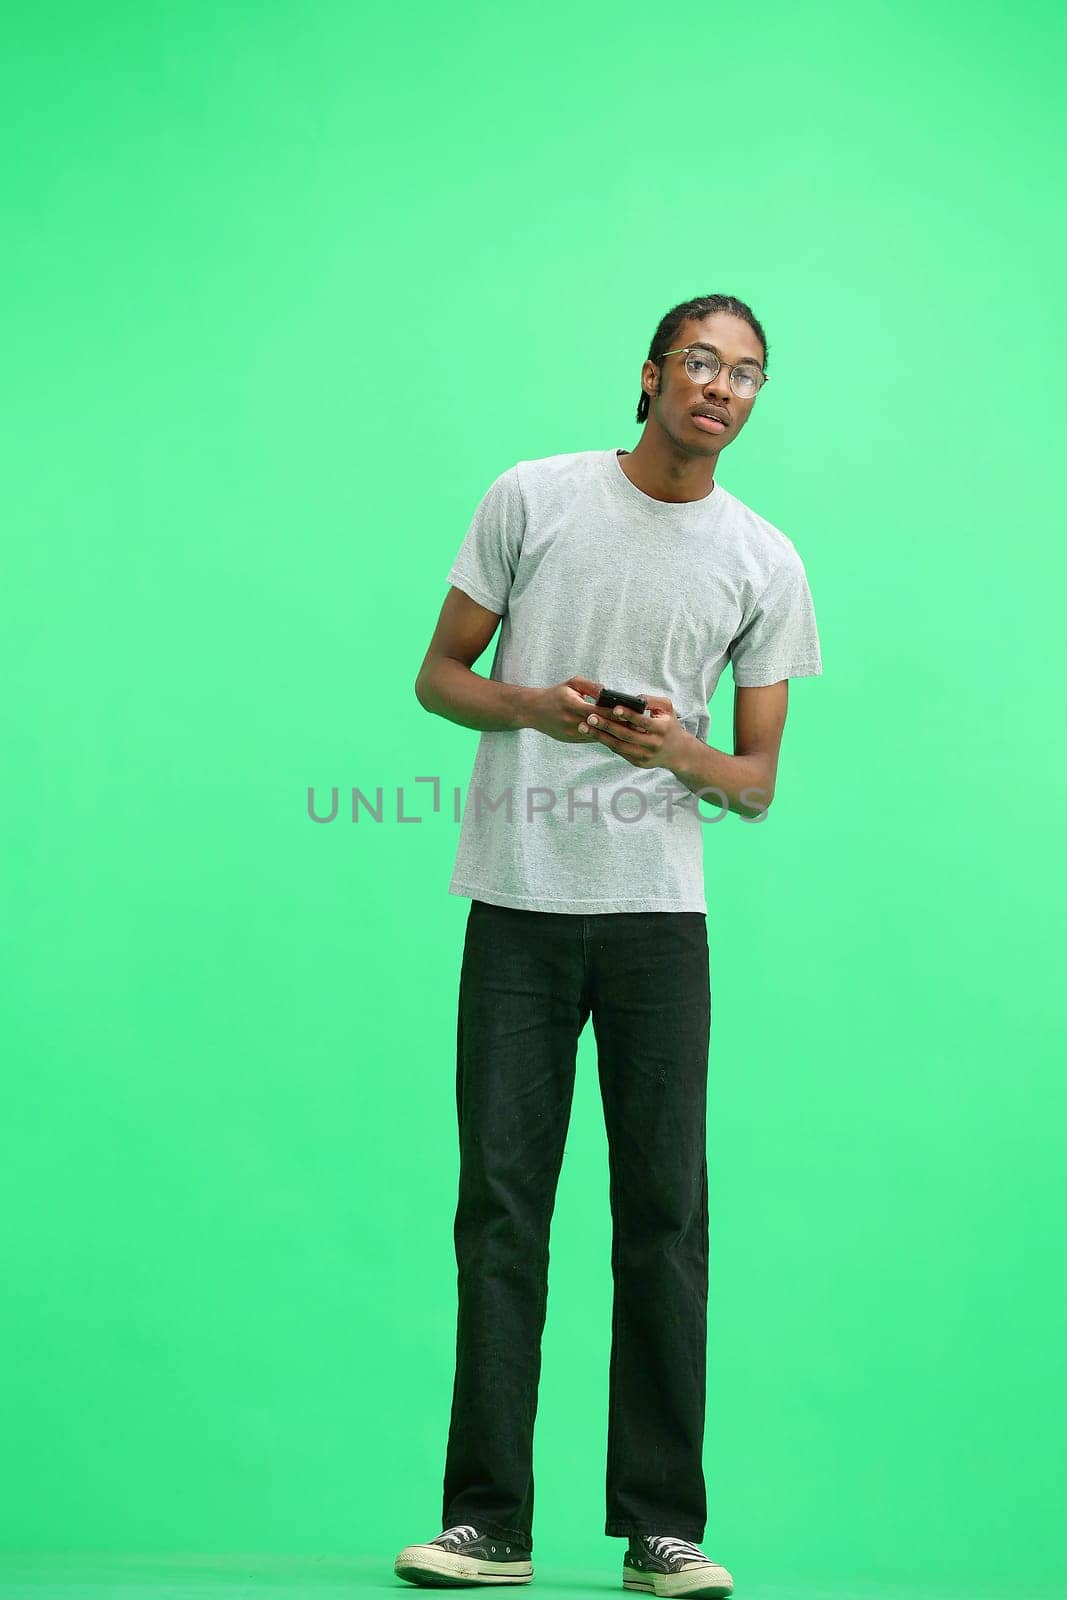 A man in a gray T-shirt, on a green background, full-length, with a phone.